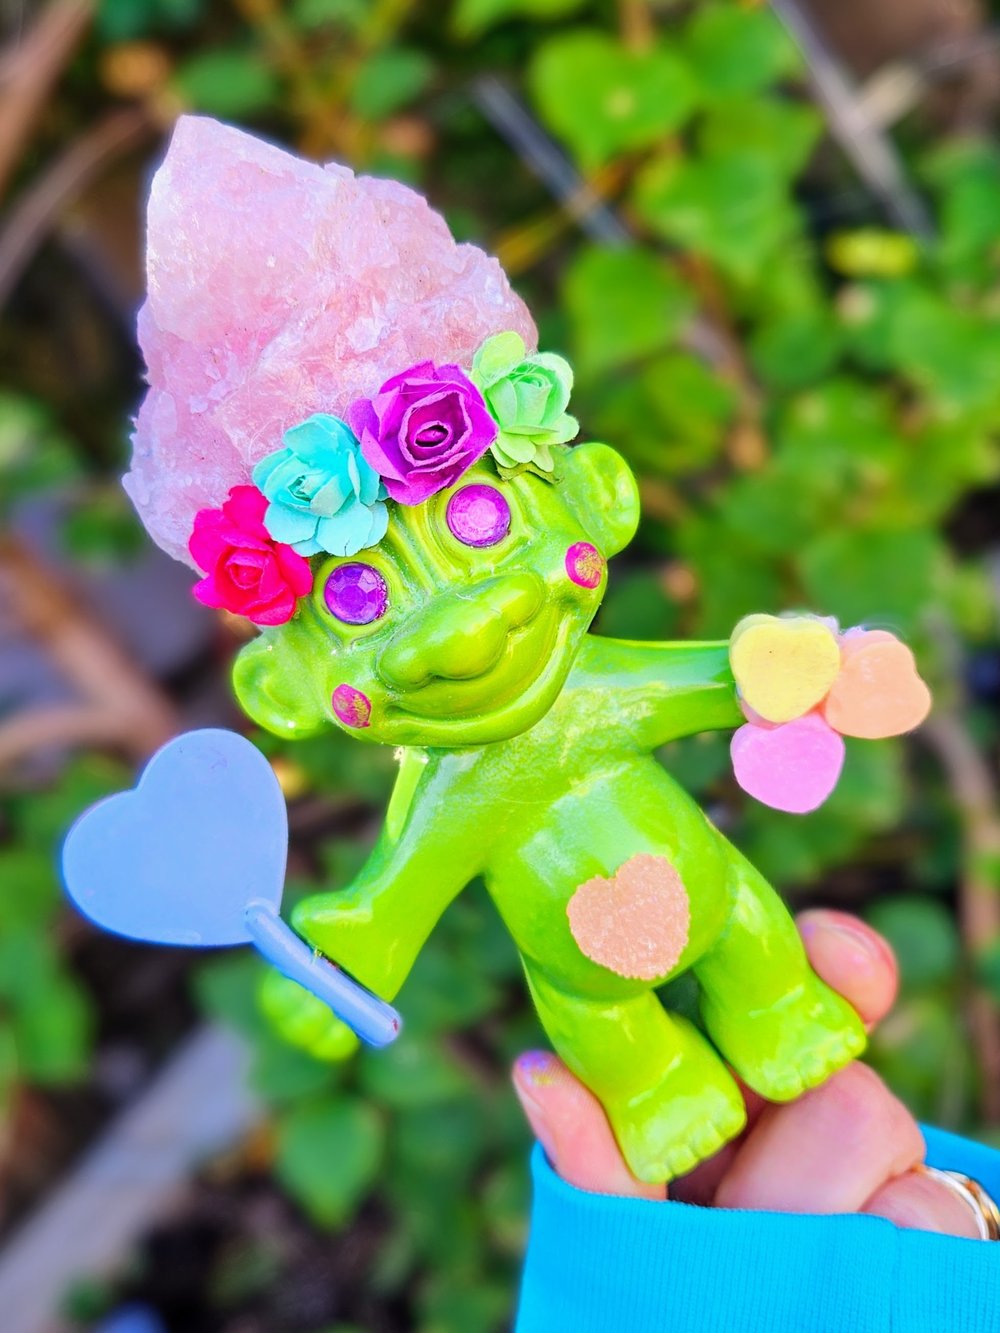 Rose Quartz Candy Heart Troll with Blue Personalized Candy Heart MSG 6"